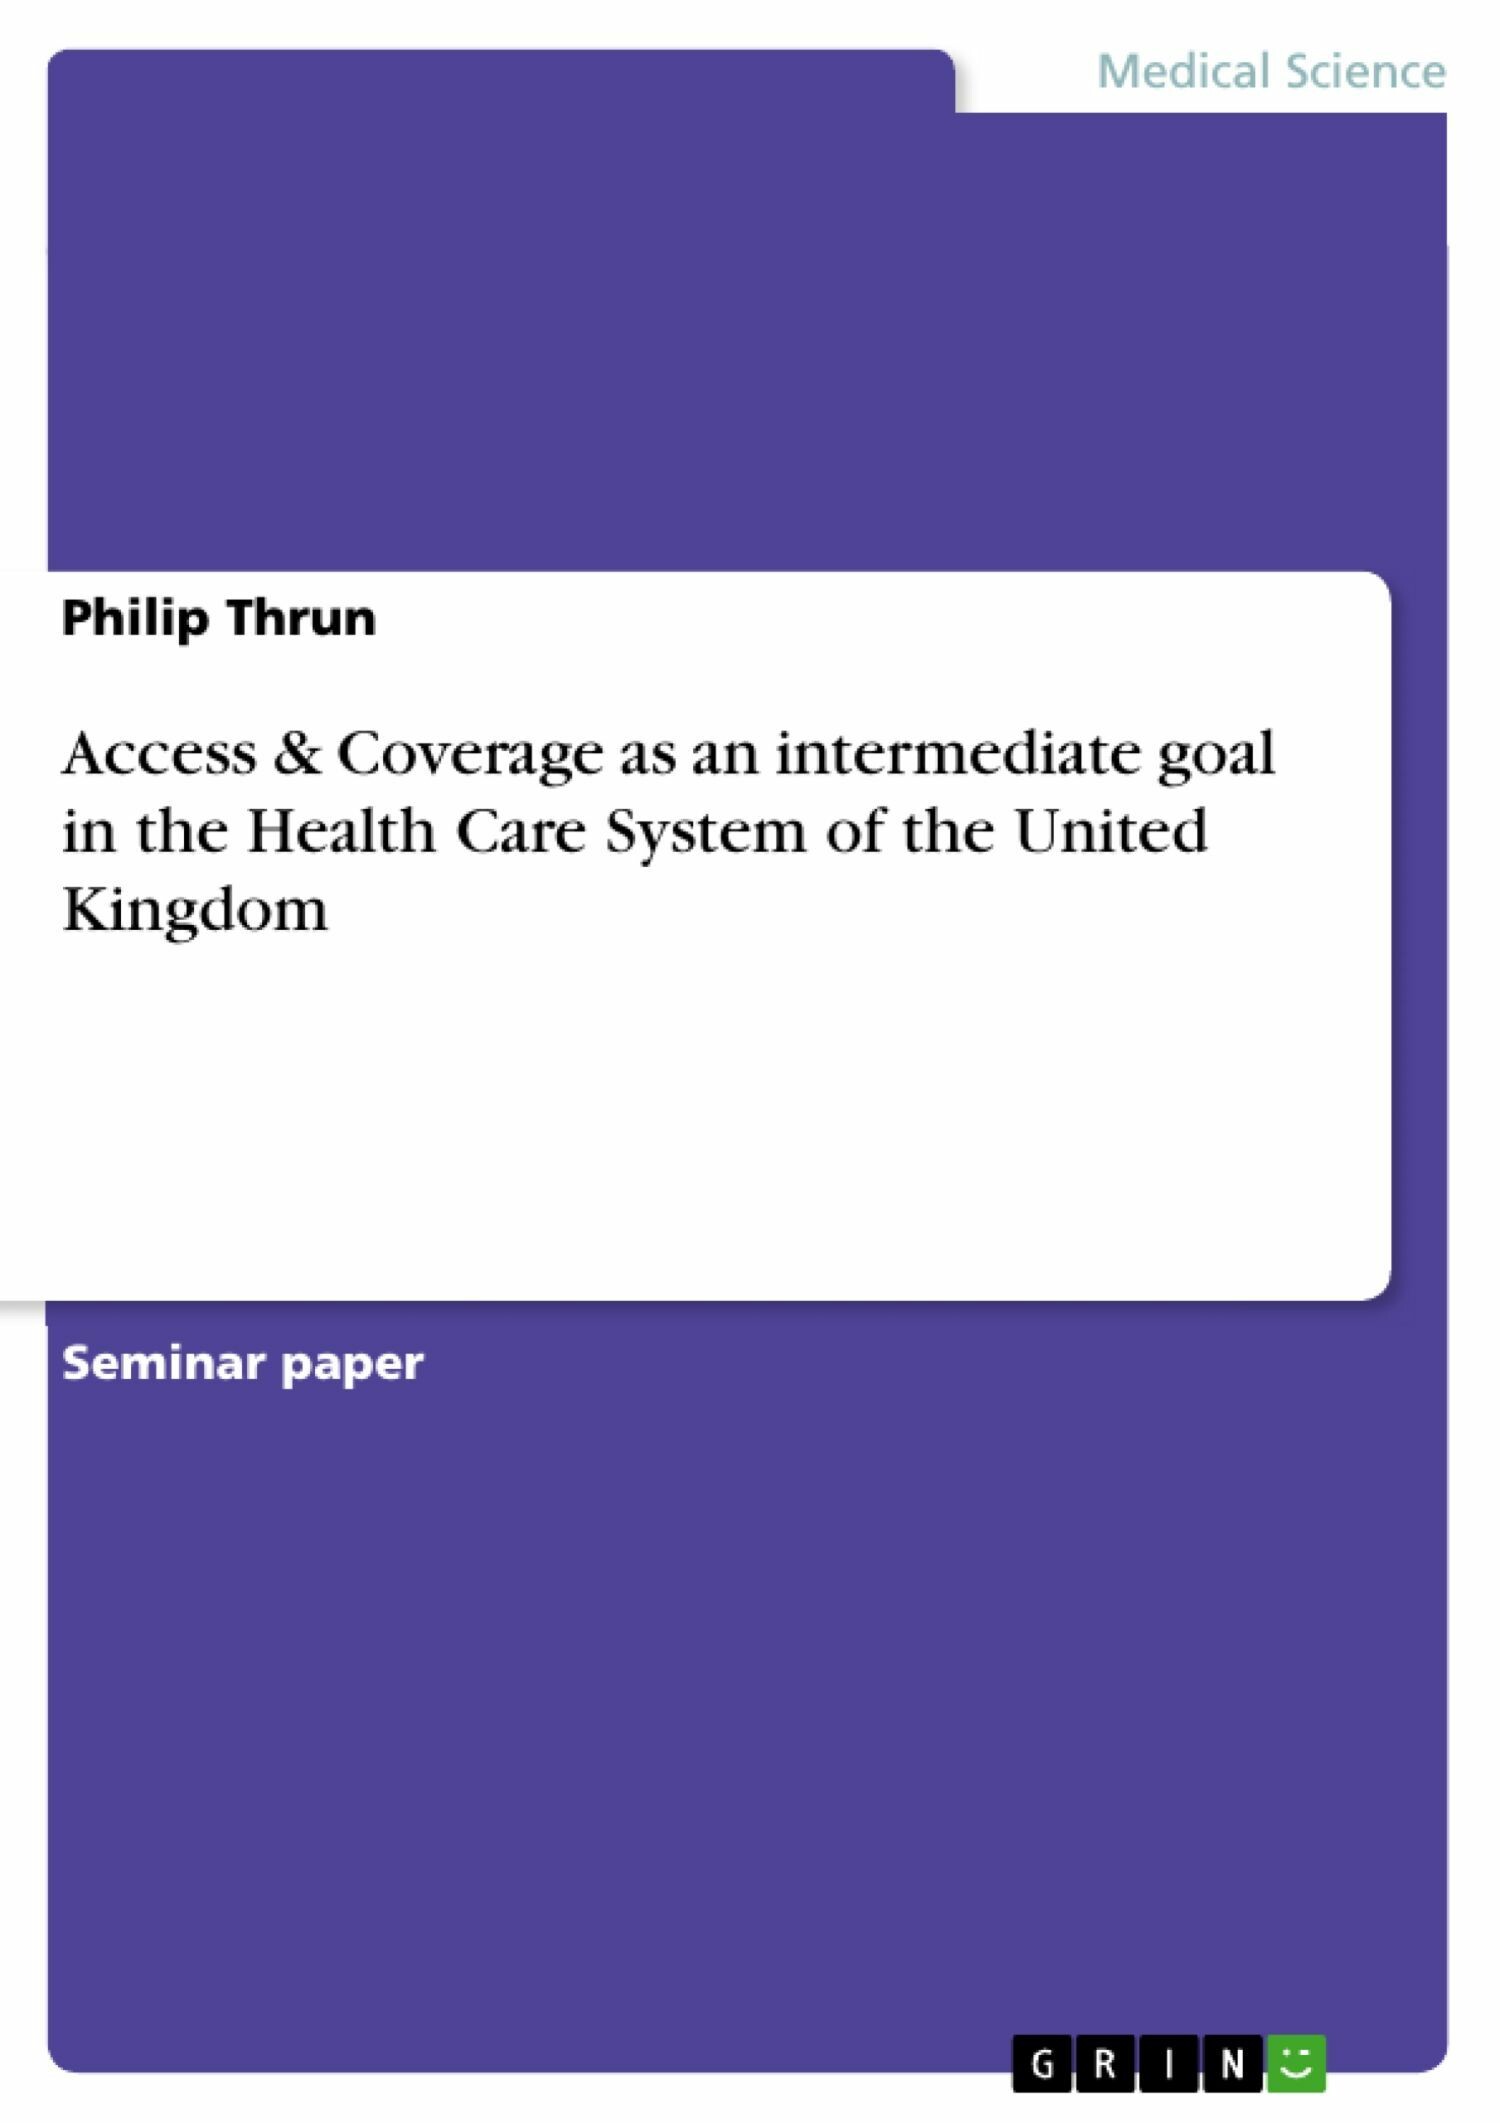 Access & Coverage as an intermediate goal in the Health Care System of the United Kingdom